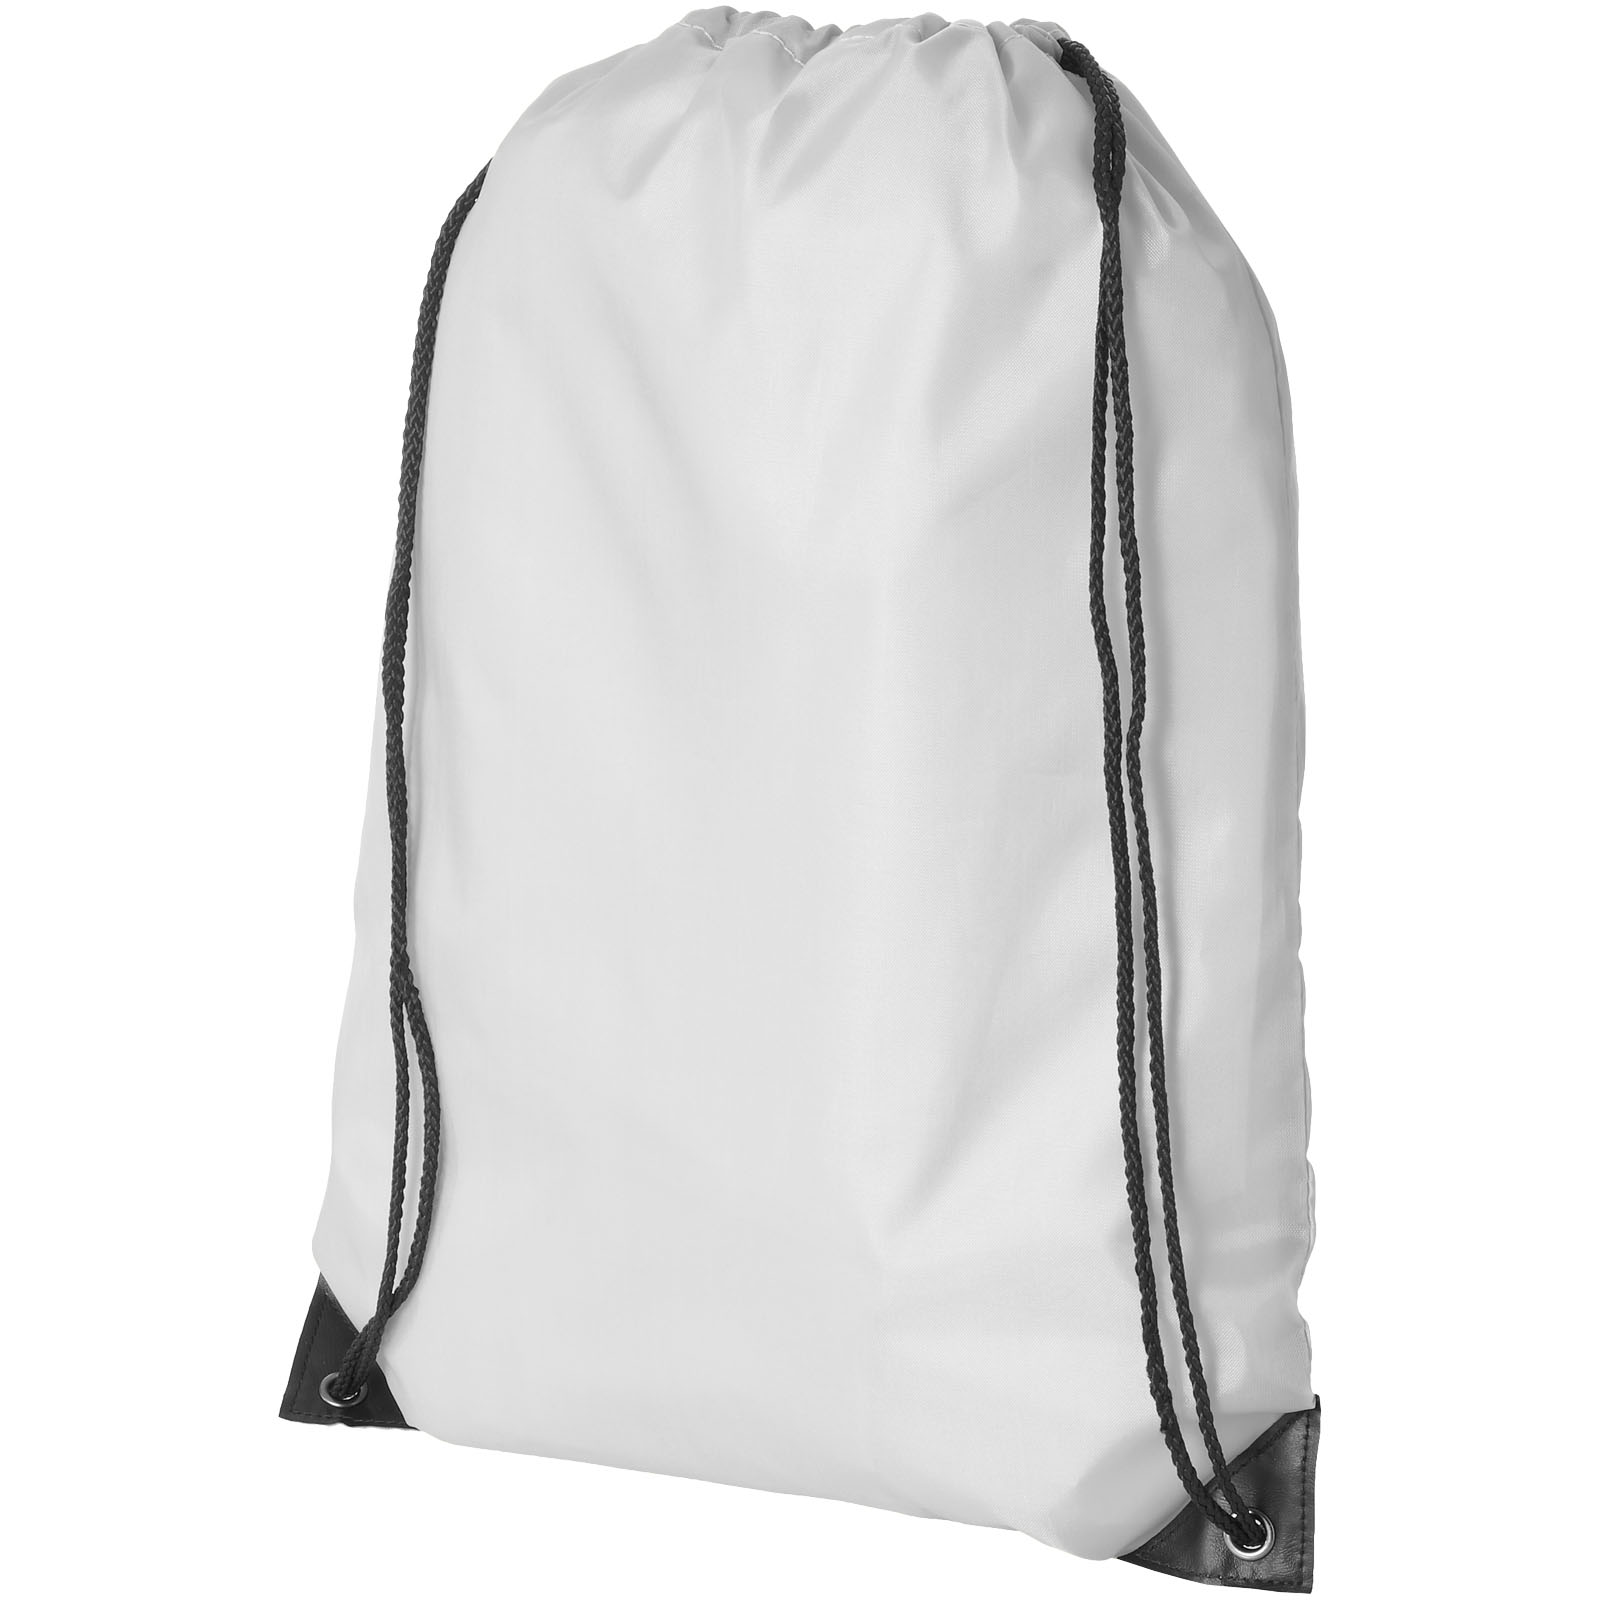 Bags - Oriole premium drawstring backpack 5L